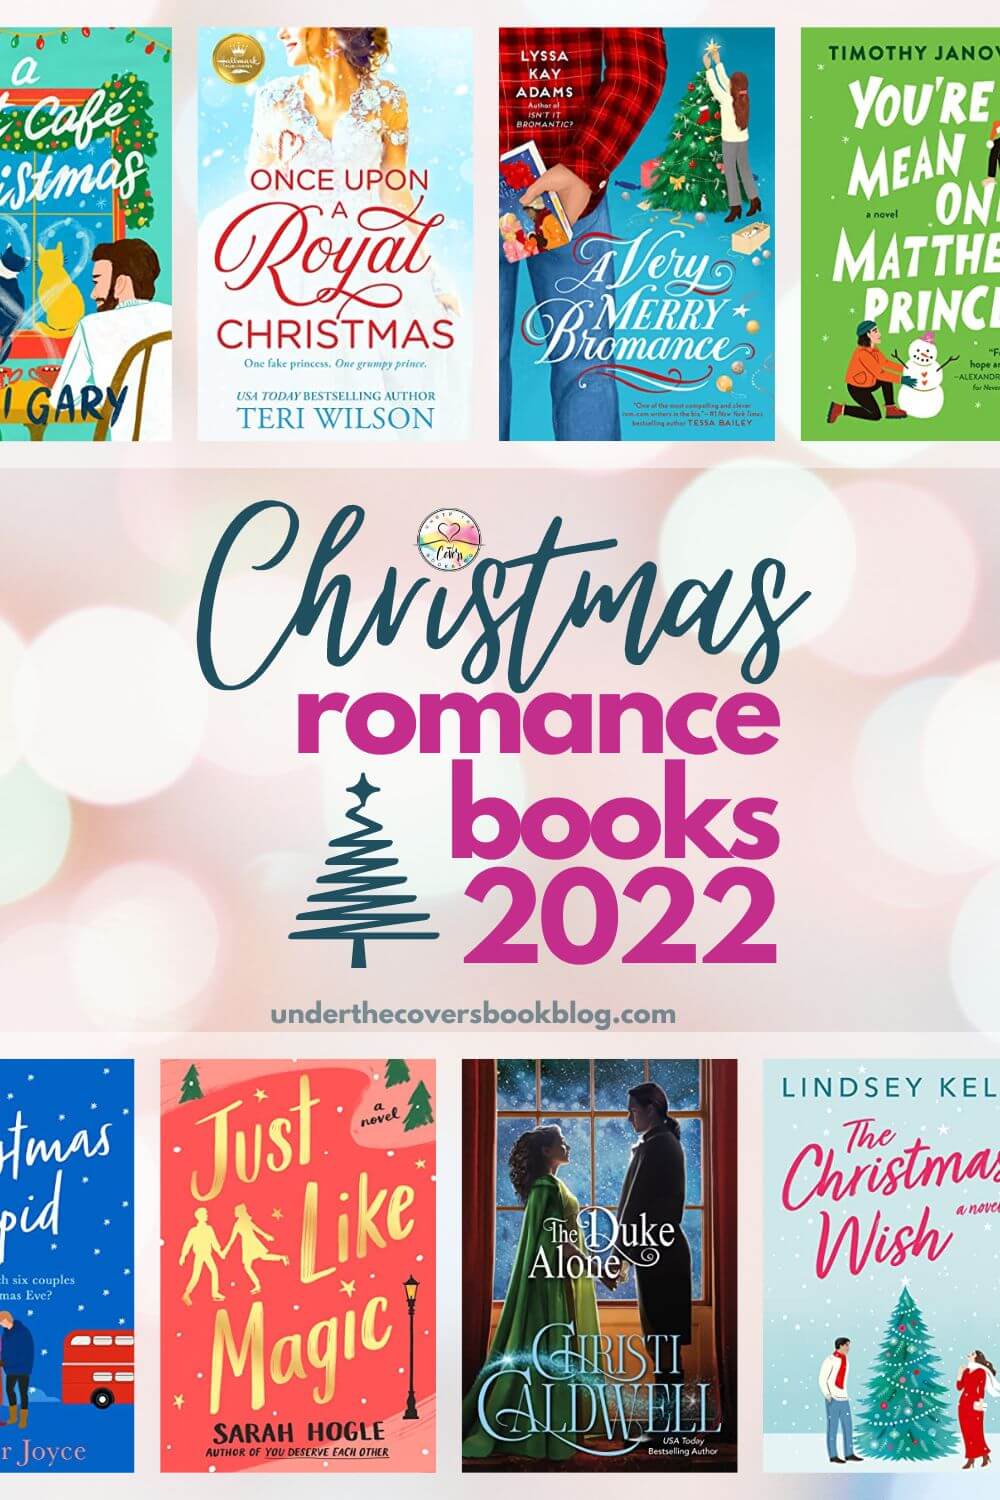 New Christmas Romance Books to add to your wishlist this year